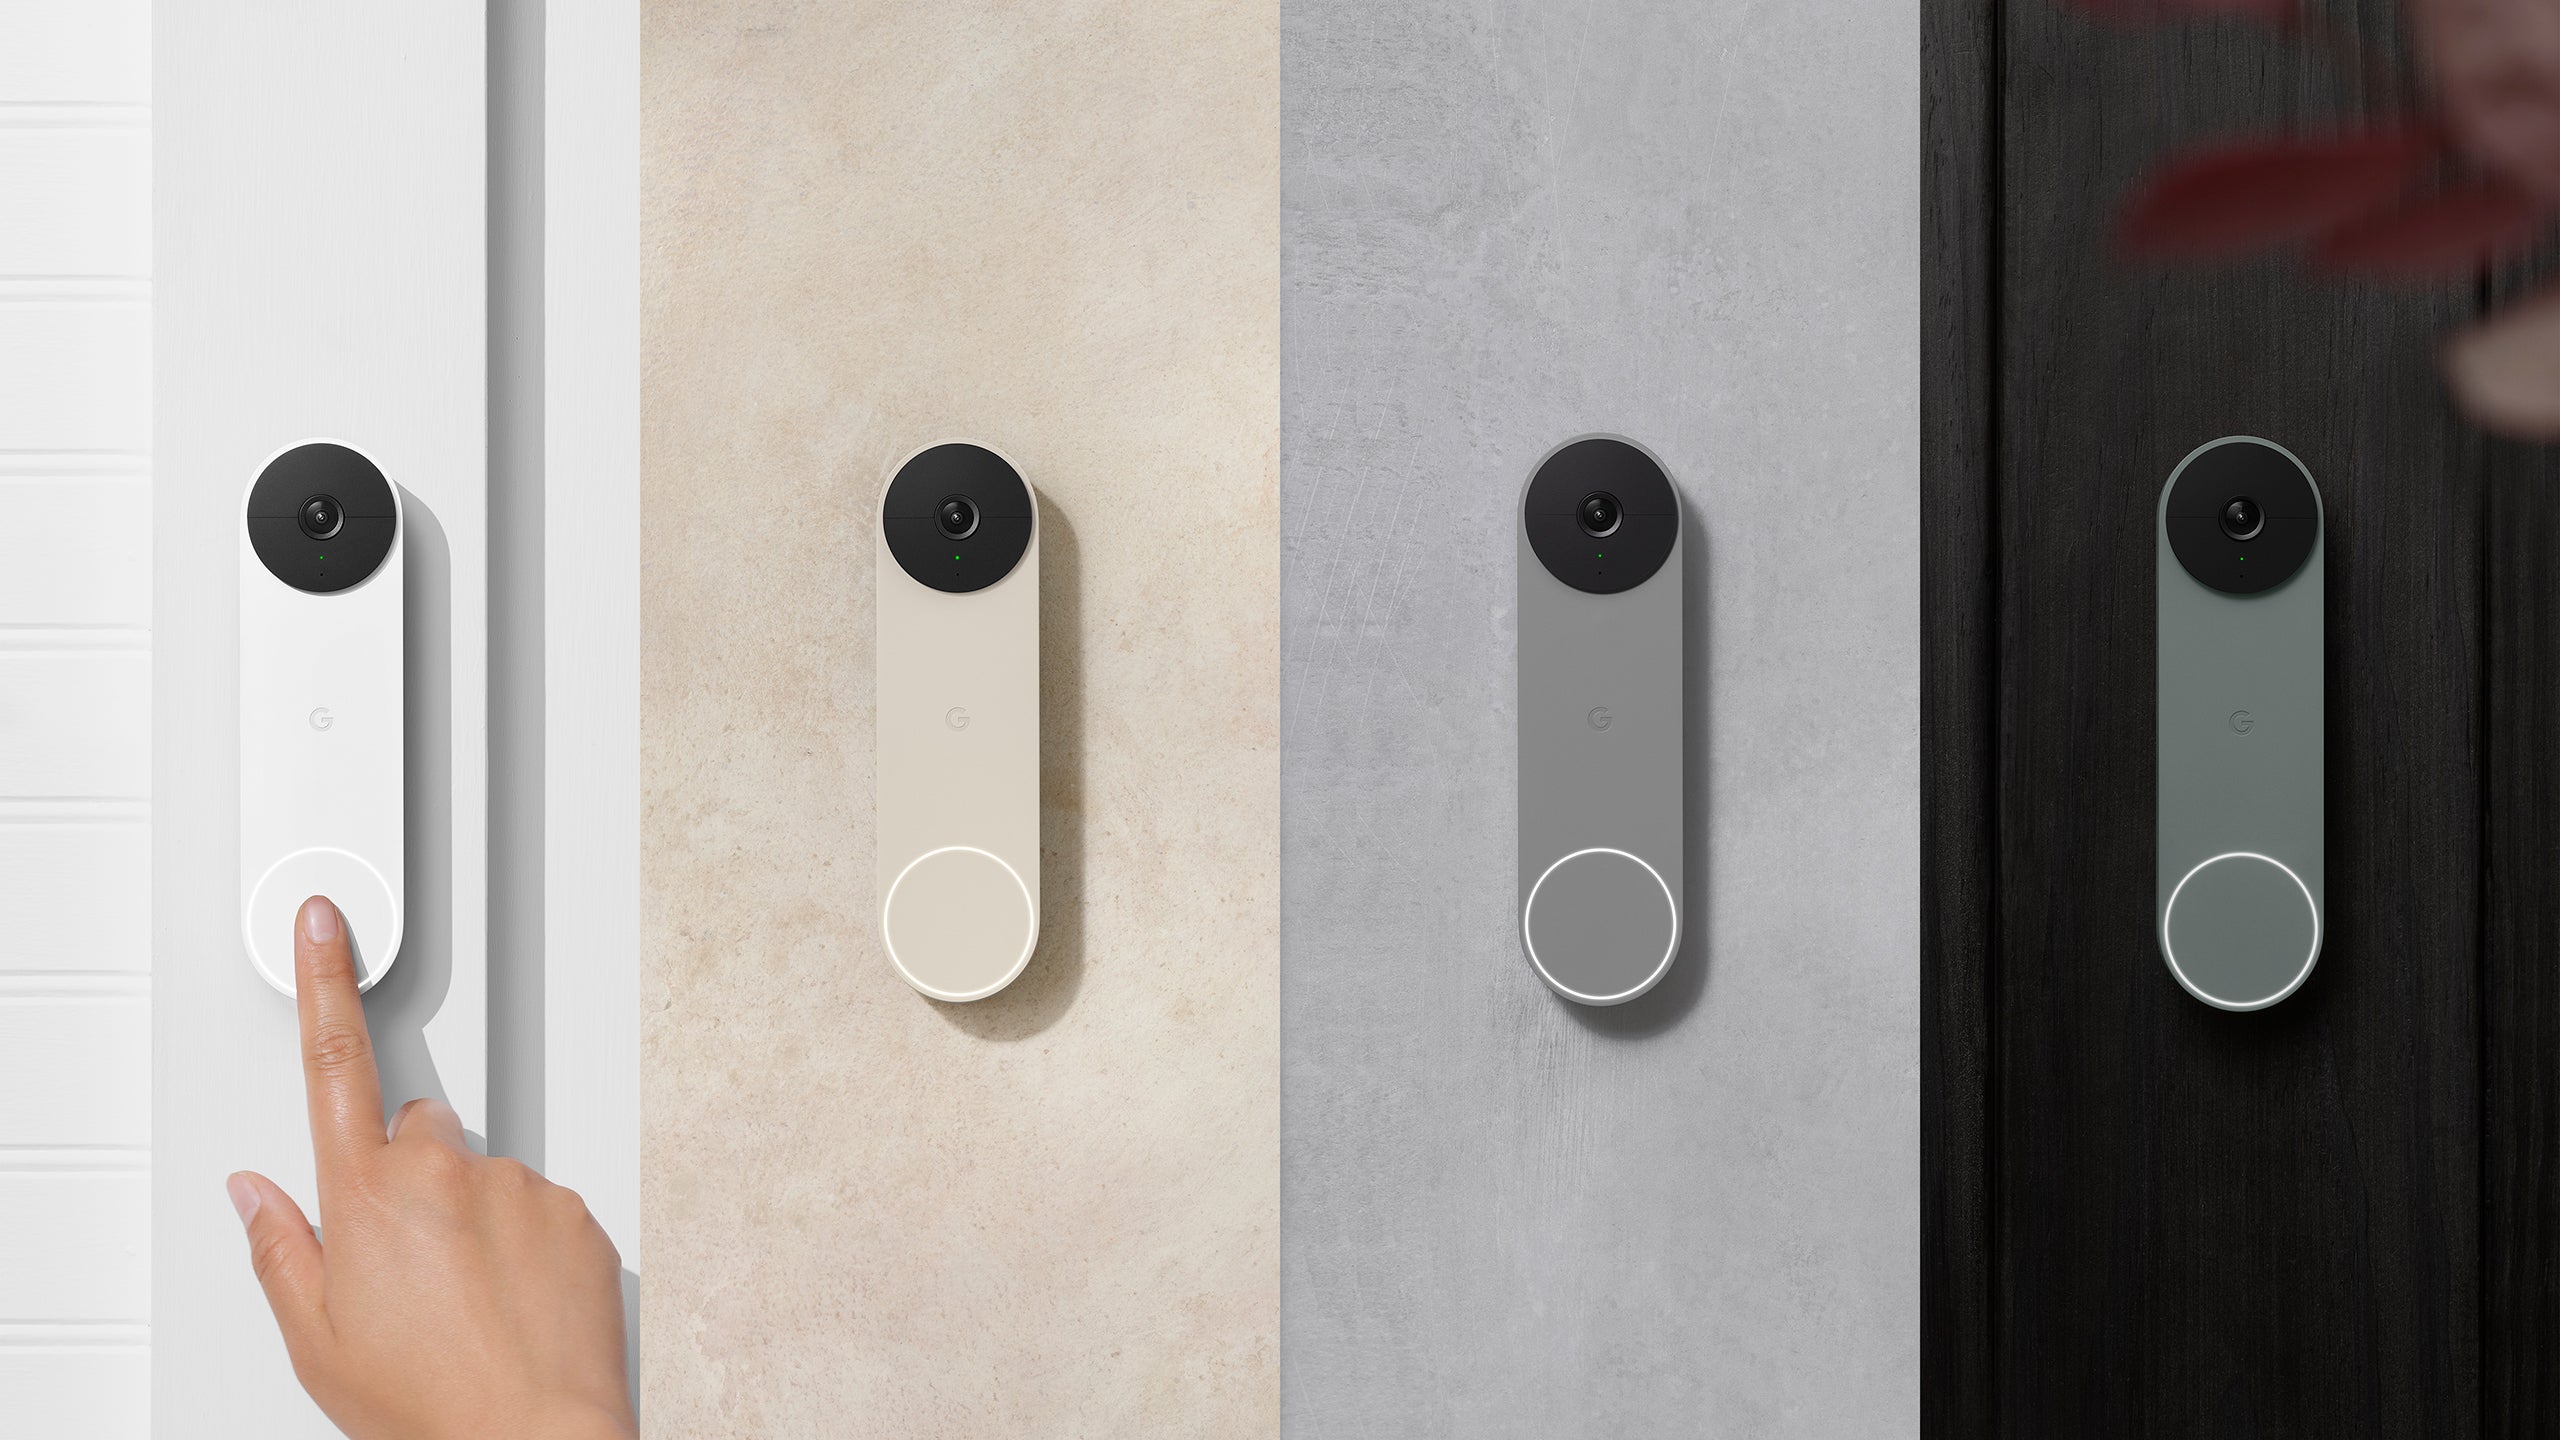 Like all the new Nest cams, the Nest Doorbell has a small indicator light so you know when it's recording.  (Image: Google)